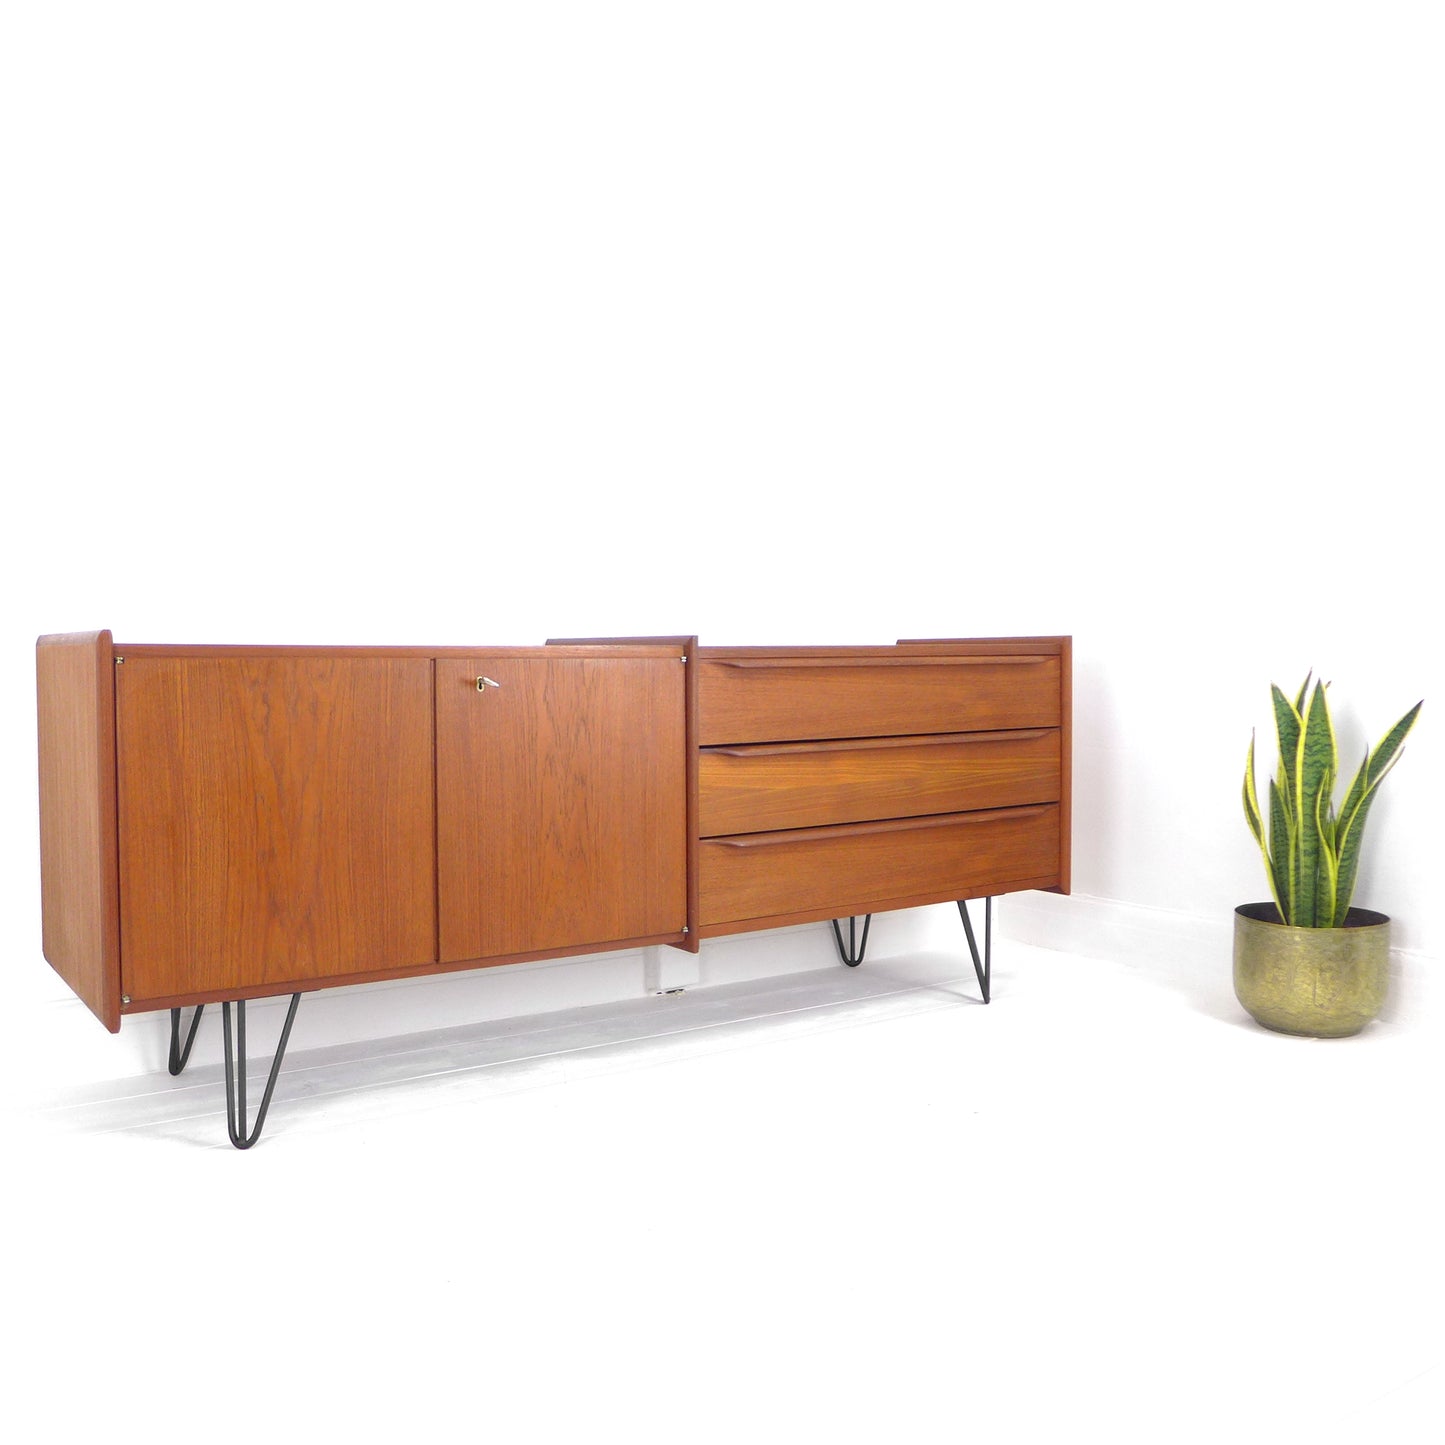 Mid Century Teak Sideboard on Hairpin Legs - Record / Drinks Cabinet / TV Stand